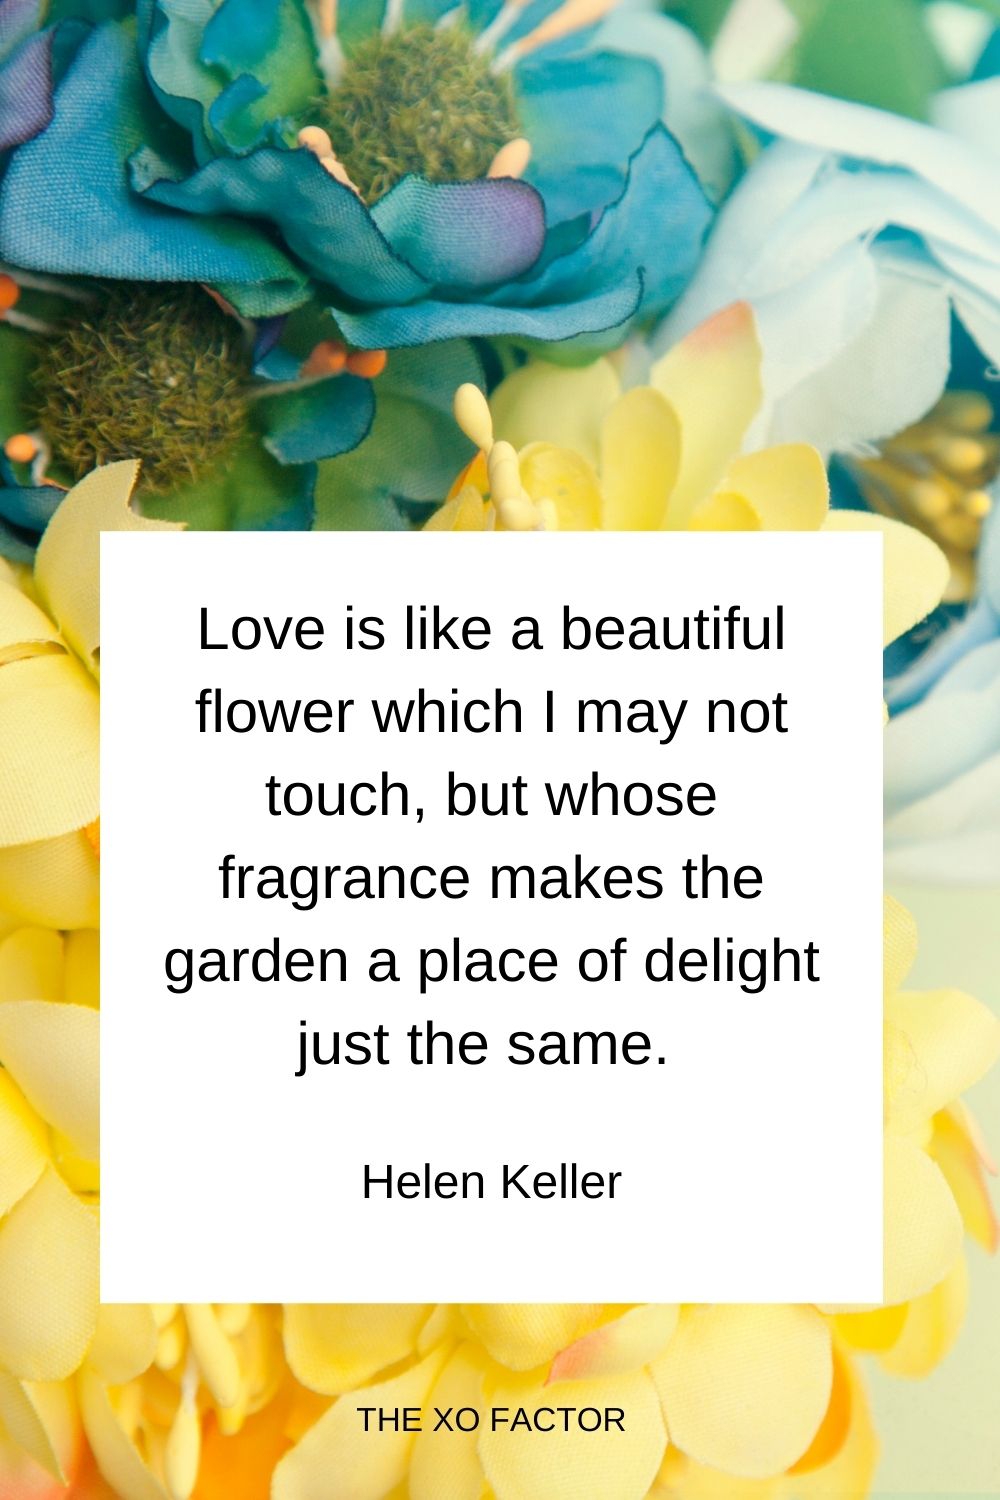 Love is like a beautiful flower which I may not touch, but whose fragrance makes the garden a place of delight just the same.  Helen Keller